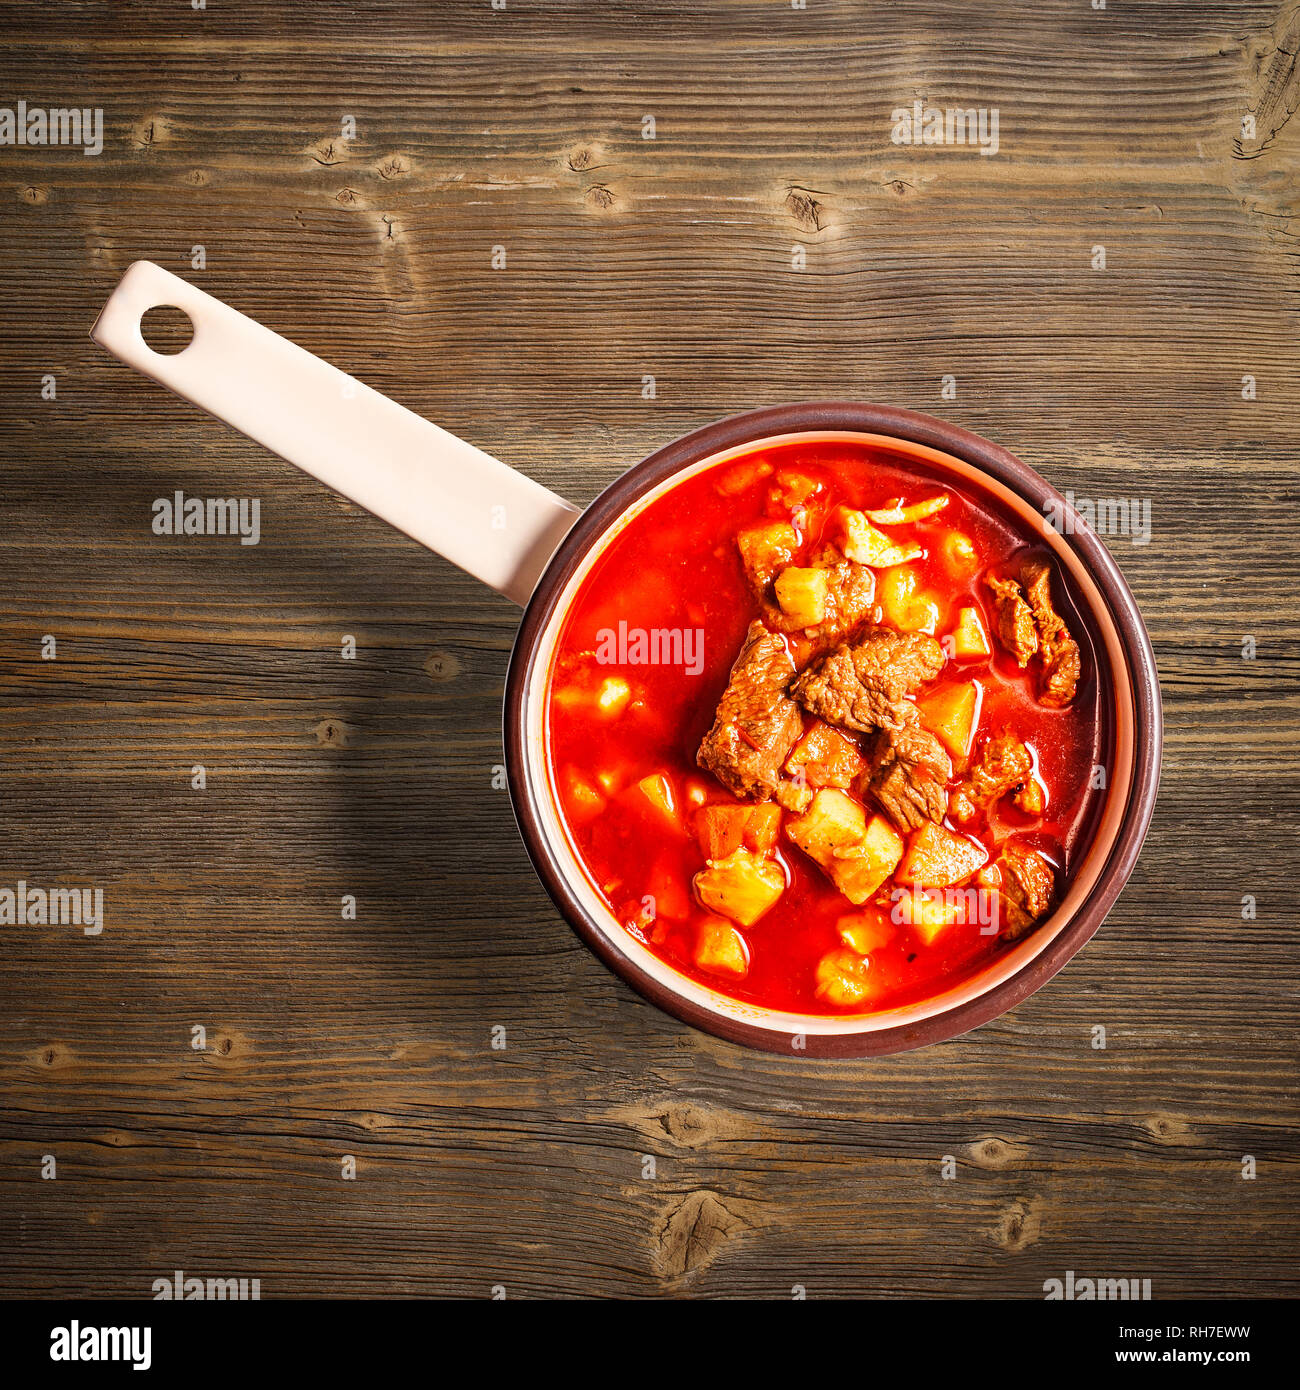 Flat lay of goulash soup on wooden background Stock Photo